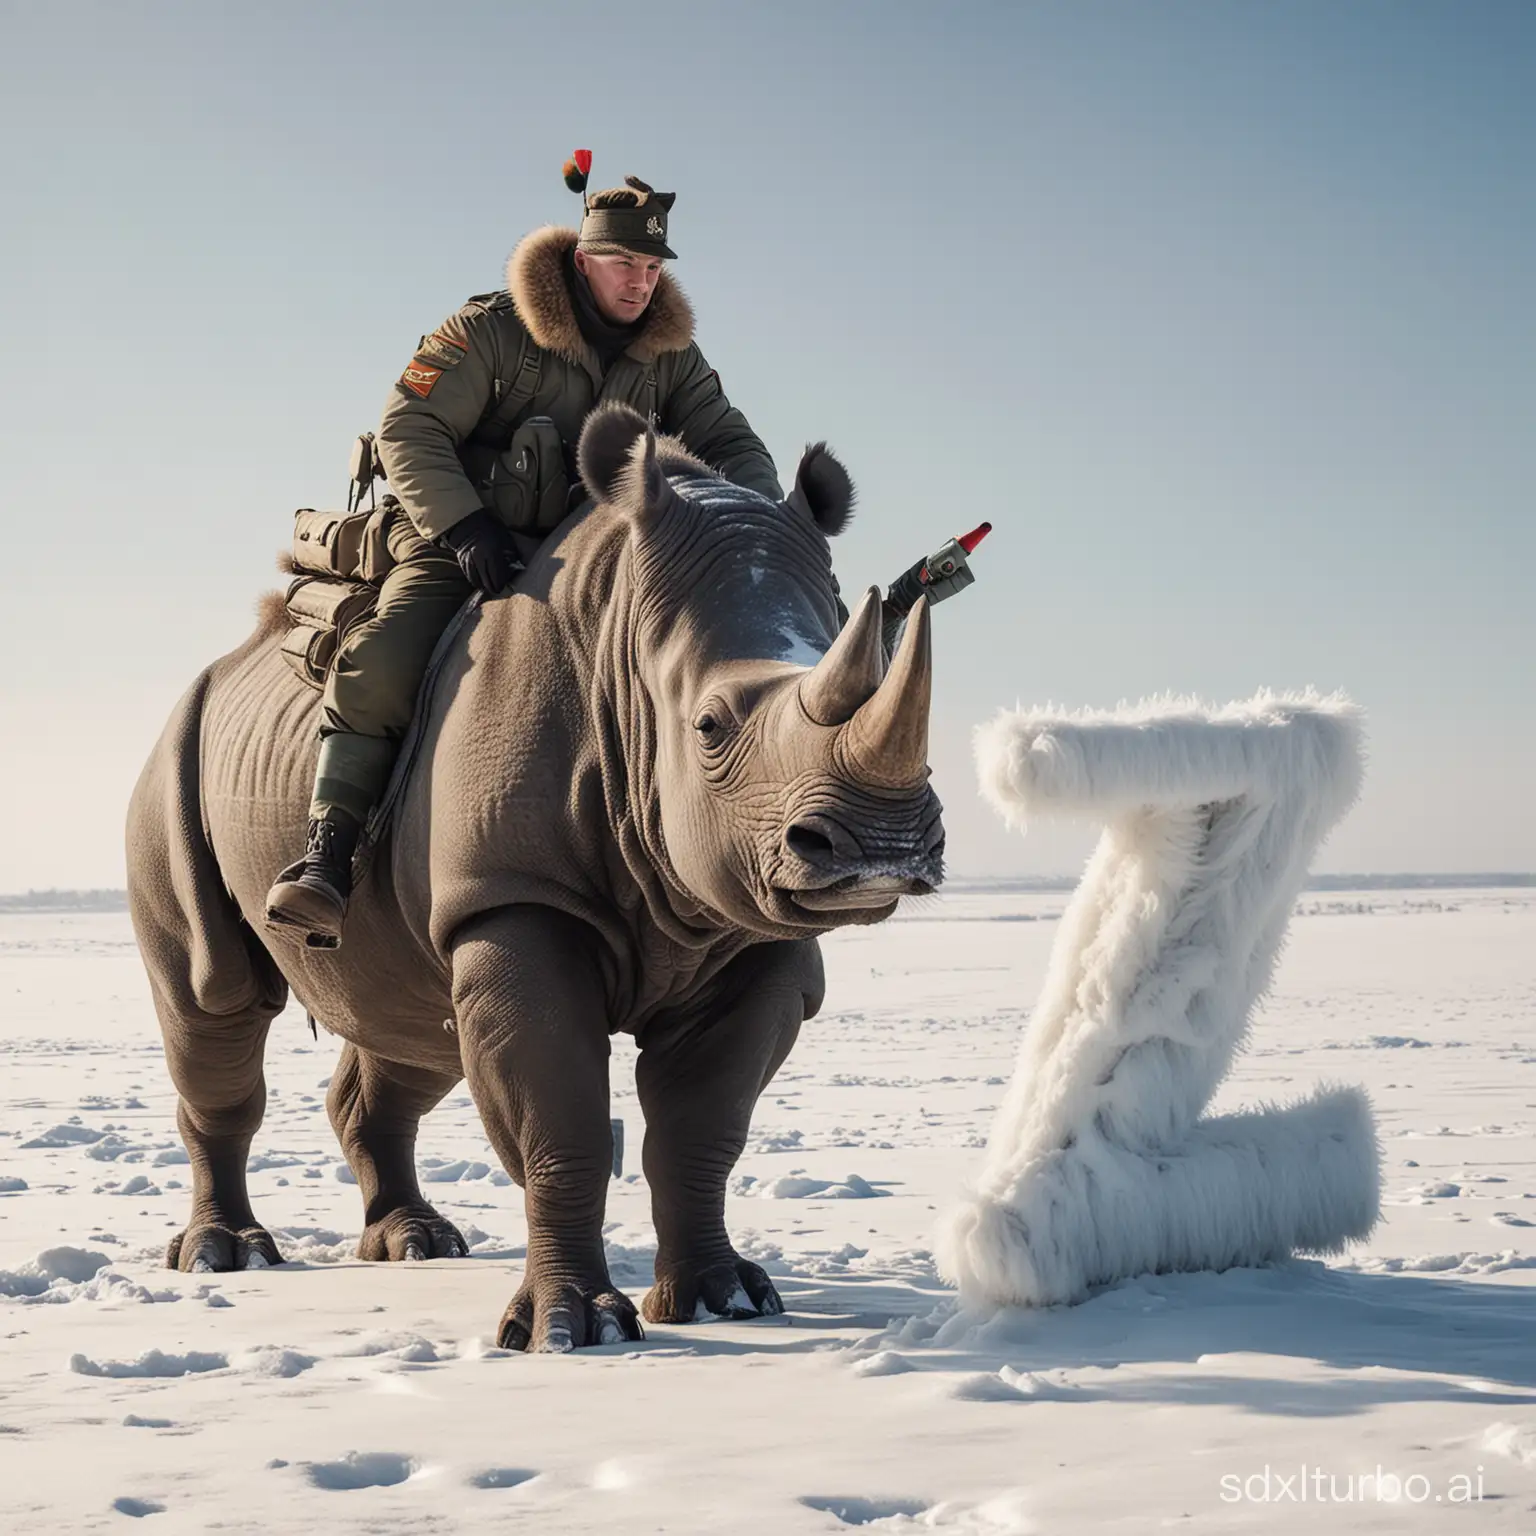 Russian man in military uniform on a hairy rhinoceros with the letter Z on the side. All this happens in harsh winter next to a drone in the air.